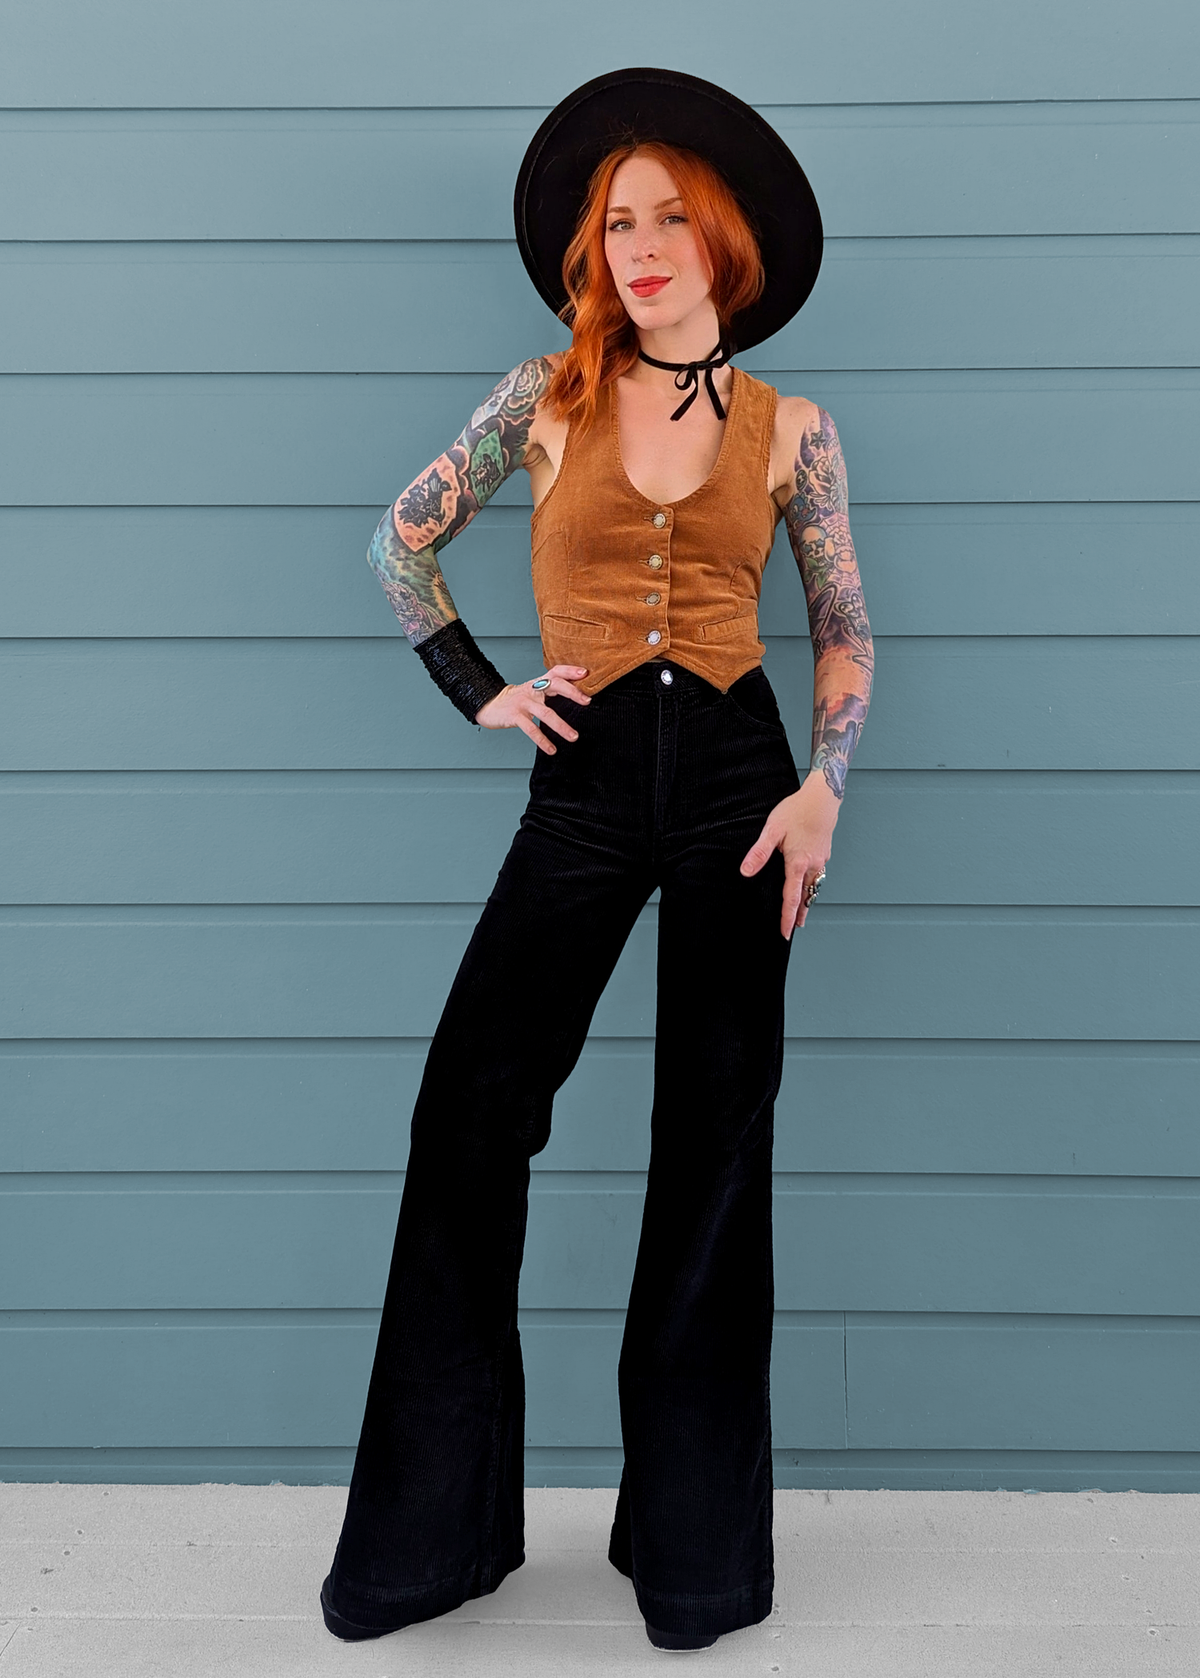 Rolla's Jeans Black Velvet Corduroy Eastcoast Flares: 70s inspired bell bottoms with a high rise waist, wide wale corduroy and a flare leg.